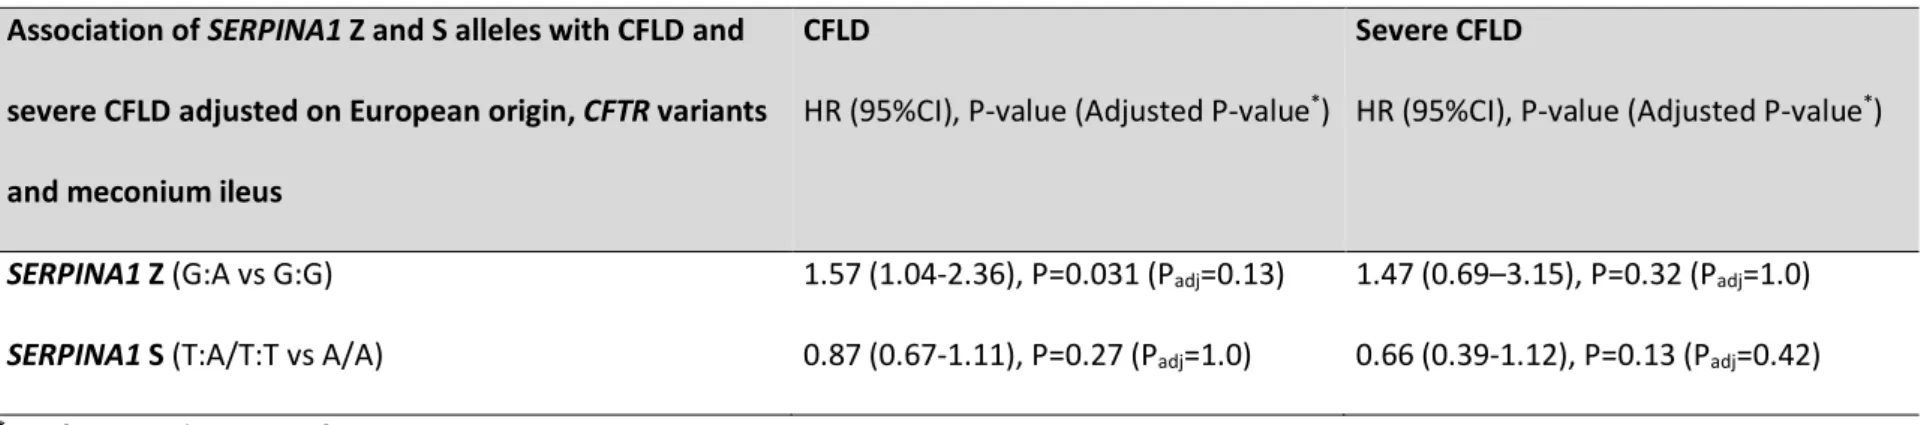 Table S5:  Association of SERPINA1 Z and S alleles with CFLD and severe CFLD adjusted on European origin, CFTR variants and meconium ileus 